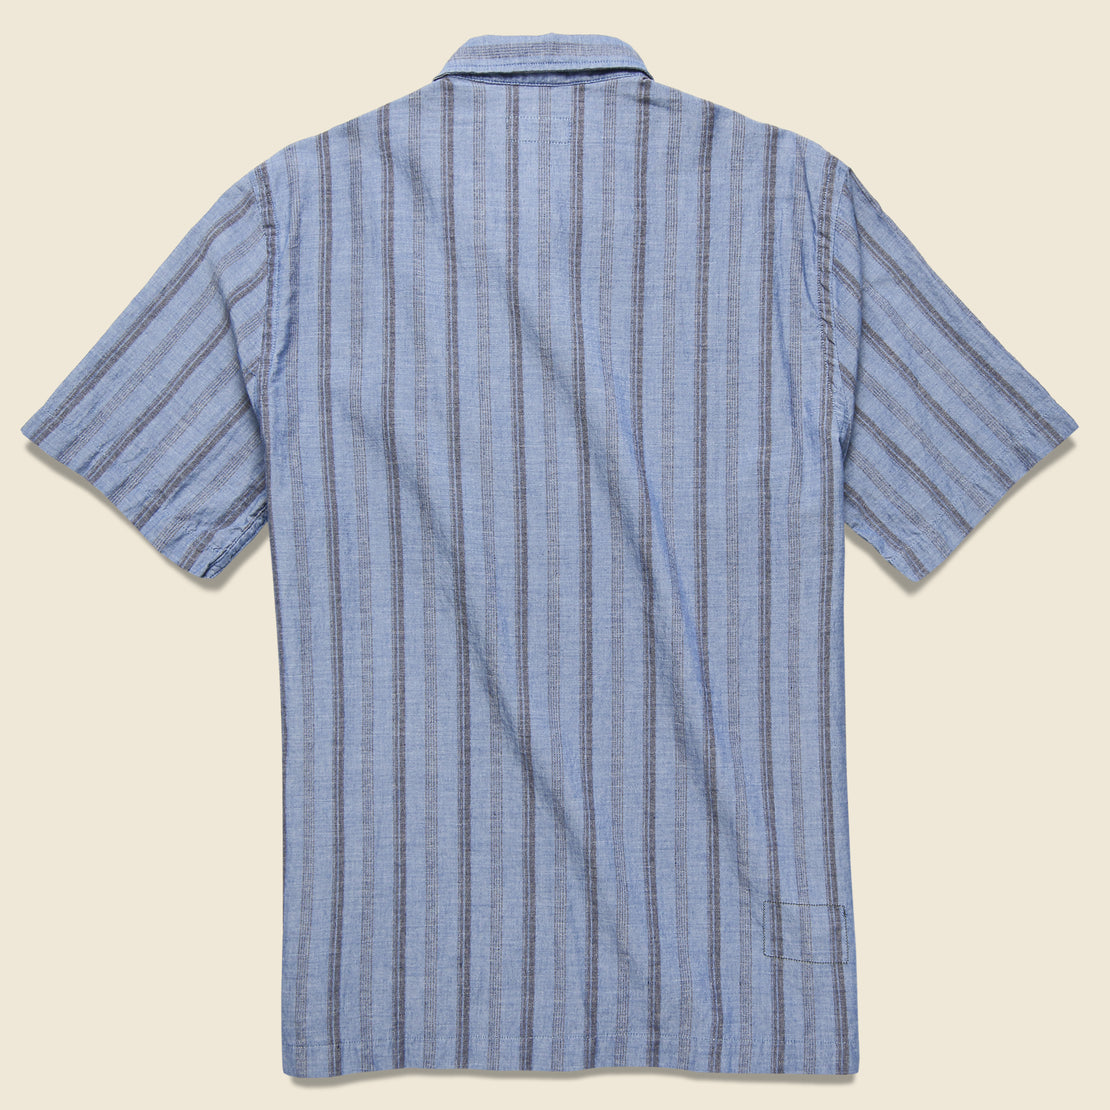 Road Shirt - Blue Cesar Stripe - Universal Works - STAG Provisions - Tops - S/S Woven - Stripe